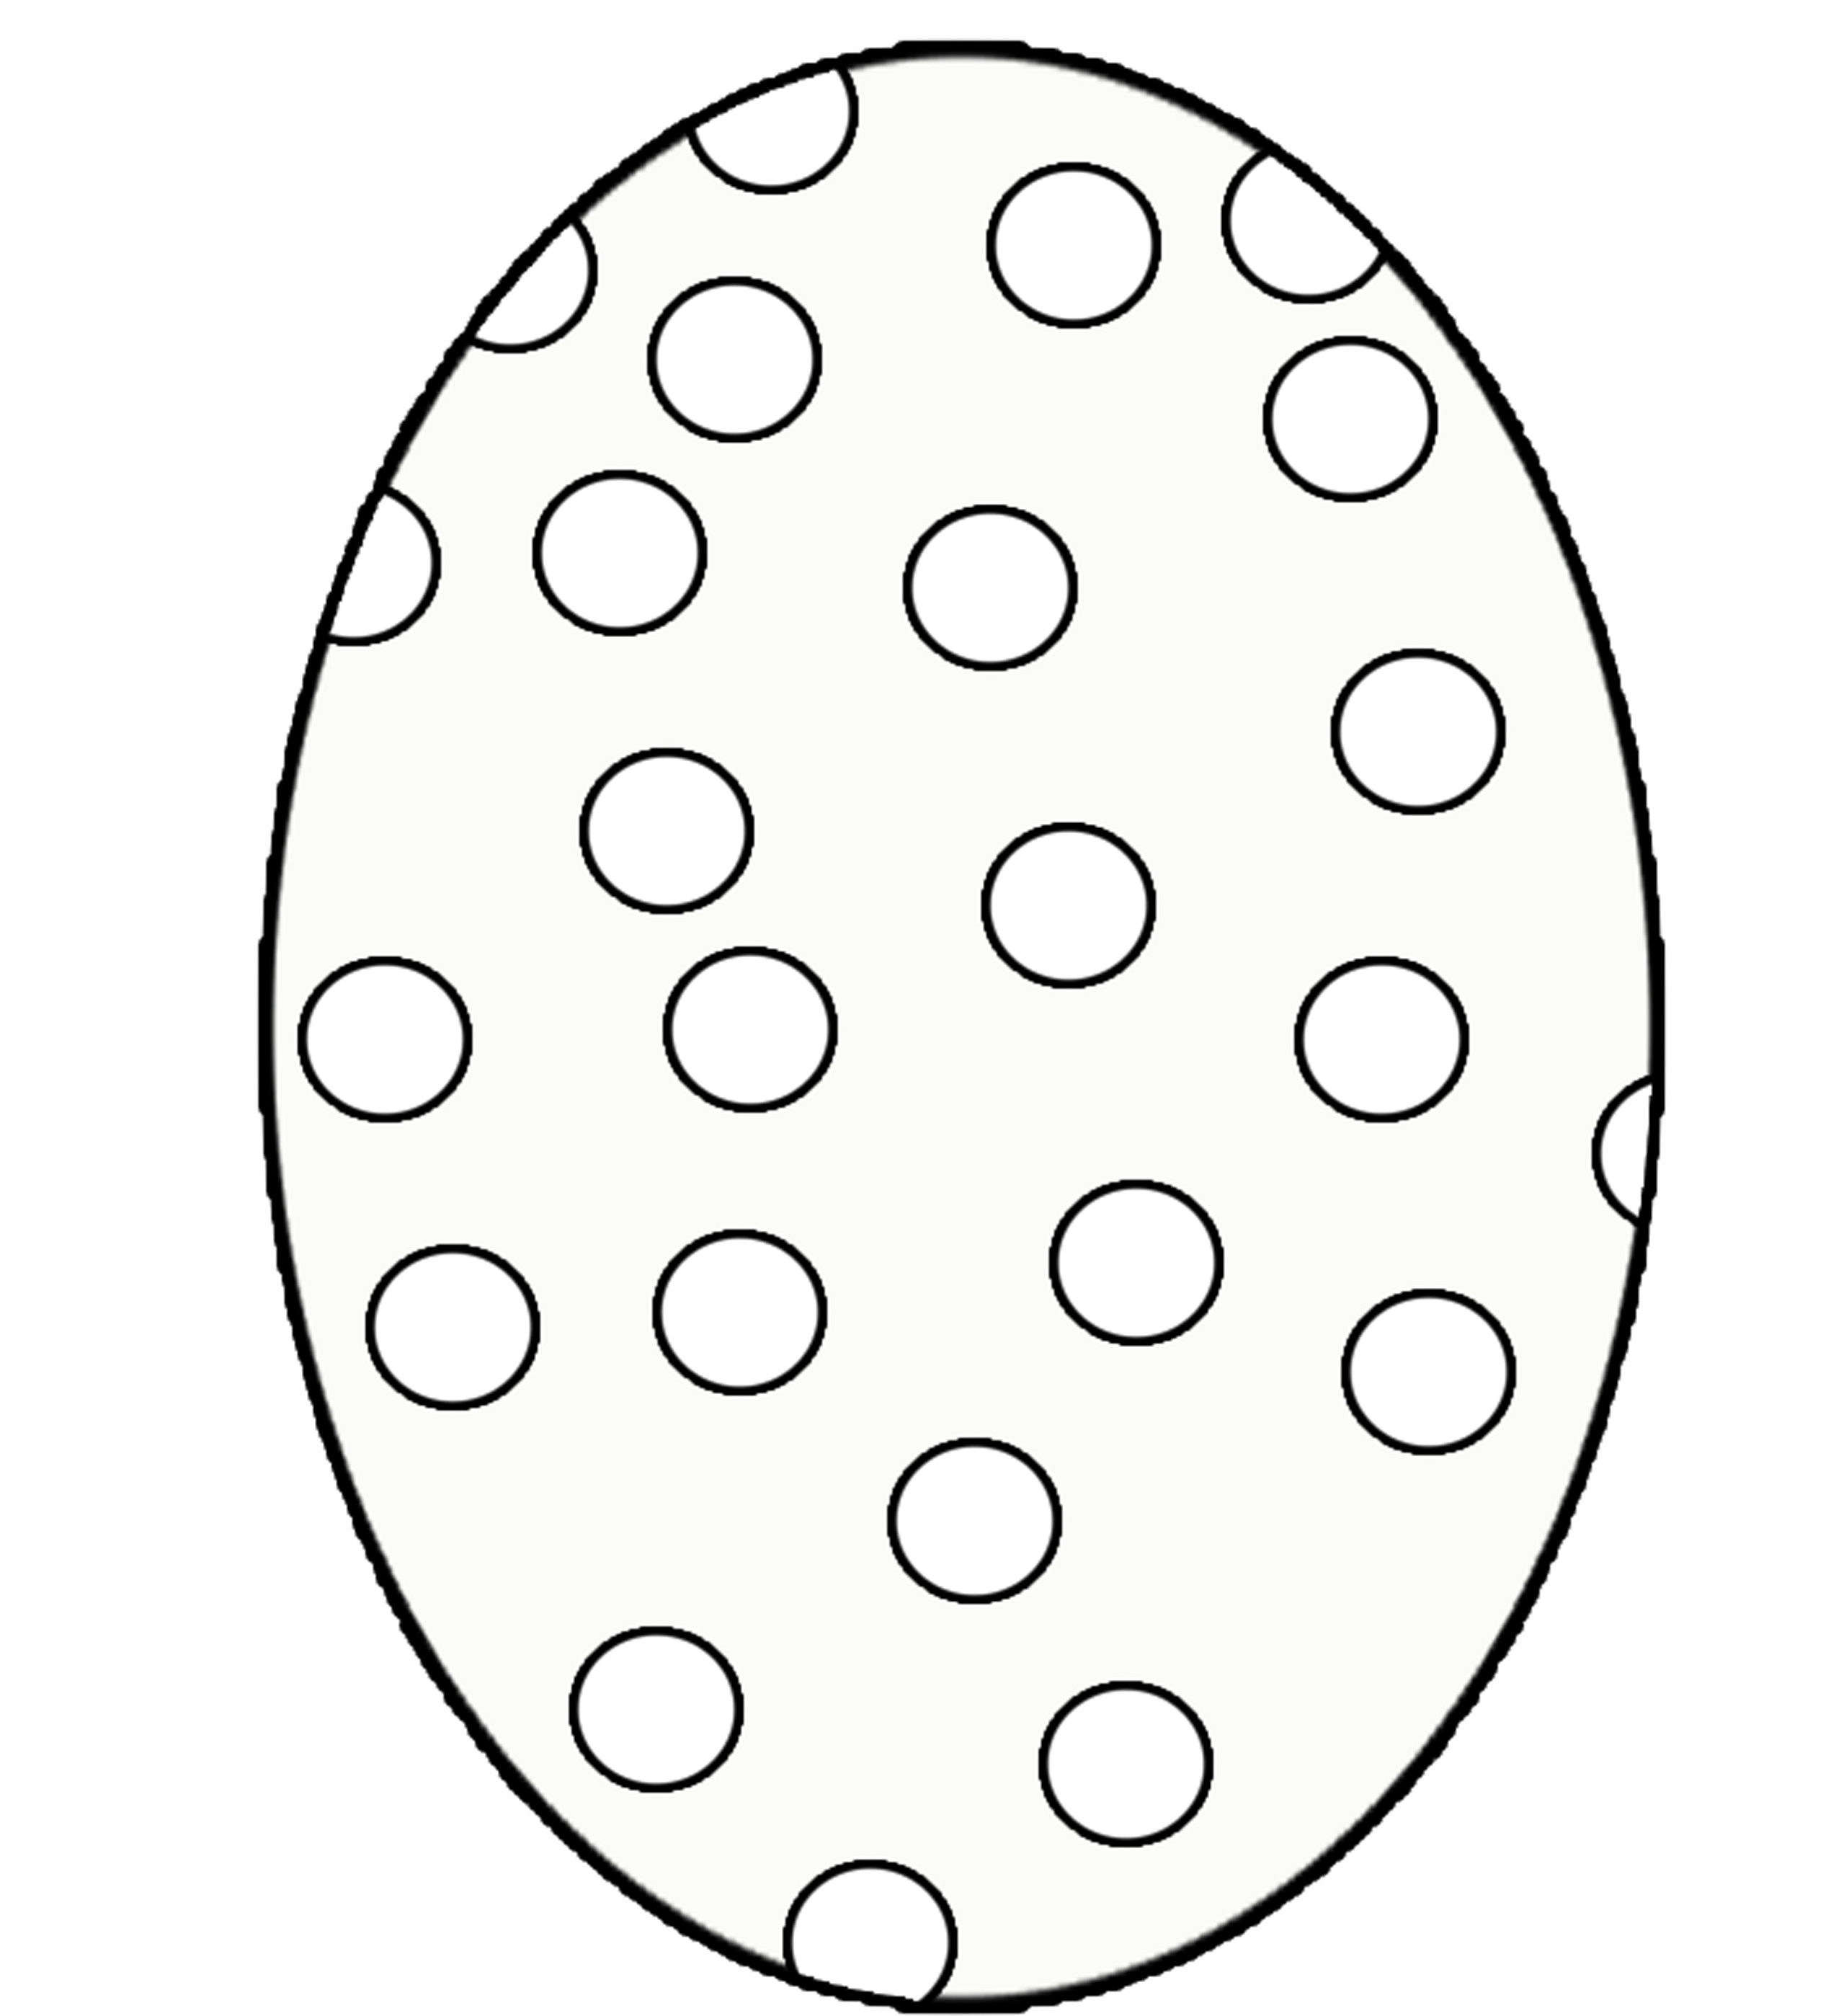 egg coloring page easter egg coloring pages twopartswhimsicalonepartpeculiar coloring page egg 